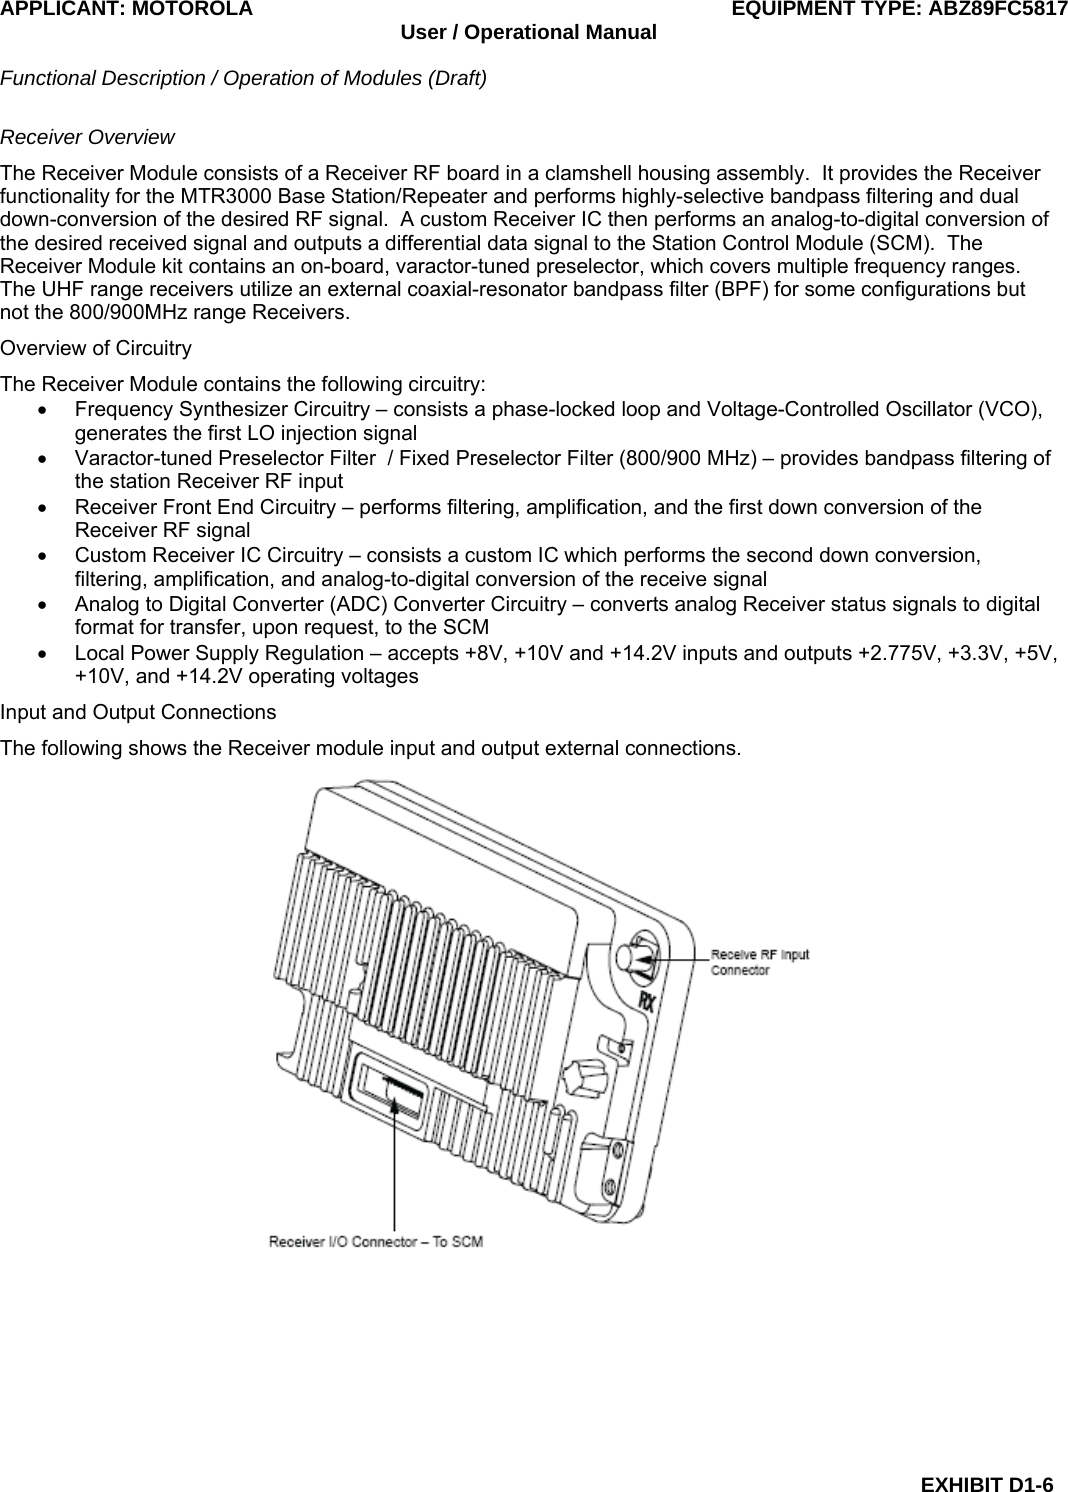 APPLICANT: MOTOROLA  EQUIPMENT TYPE: ABZ89FC5817 User / Operational Manual  Functional Description / Operation of Modules (Draft)  EXHIBIT D1-6 Receiver Overview The Receiver Module consists of a Receiver RF board in a clamshell housing assembly.  It provides the Receiver functionality for the MTR3000 Base Station/Repeater and performs highly-selective bandpass filtering and dual down-conversion of the desired RF signal.  A custom Receiver IC then performs an analog-to-digital conversion of the desired received signal and outputs a differential data signal to the Station Control Module (SCM).  The Receiver Module kit contains an on-board, varactor-tuned preselector, which covers multiple frequency ranges. The UHF range receivers utilize an external coaxial-resonator bandpass filter (BPF) for some configurations but not the 800/900MHz range Receivers. Overview of Circuitry The Receiver Module contains the following circuitry: •  Frequency Synthesizer Circuitry – consists a phase-locked loop and Voltage-Controlled Oscillator (VCO), generates the first LO injection signal •  Varactor-tuned Preselector Filter  / Fixed Preselector Filter (800/900 MHz) – provides bandpass filtering of the station Receiver RF input •  Receiver Front End Circuitry – performs filtering, amplification, and the first down conversion of the Receiver RF signal •  Custom Receiver IC Circuitry – consists a custom IC which performs the second down conversion, filtering, amplification, and analog-to-digital conversion of the receive signal •  Analog to Digital Converter (ADC) Converter Circuitry – converts analog Receiver status signals to digital format for transfer, upon request, to the SCM •  Local Power Supply Regulation – accepts +8V, +10V and +14.2V inputs and outputs +2.775V, +3.3V, +5V, +10V, and +14.2V operating voltages Input and Output Connections The following shows the Receiver module input and output external connections.  